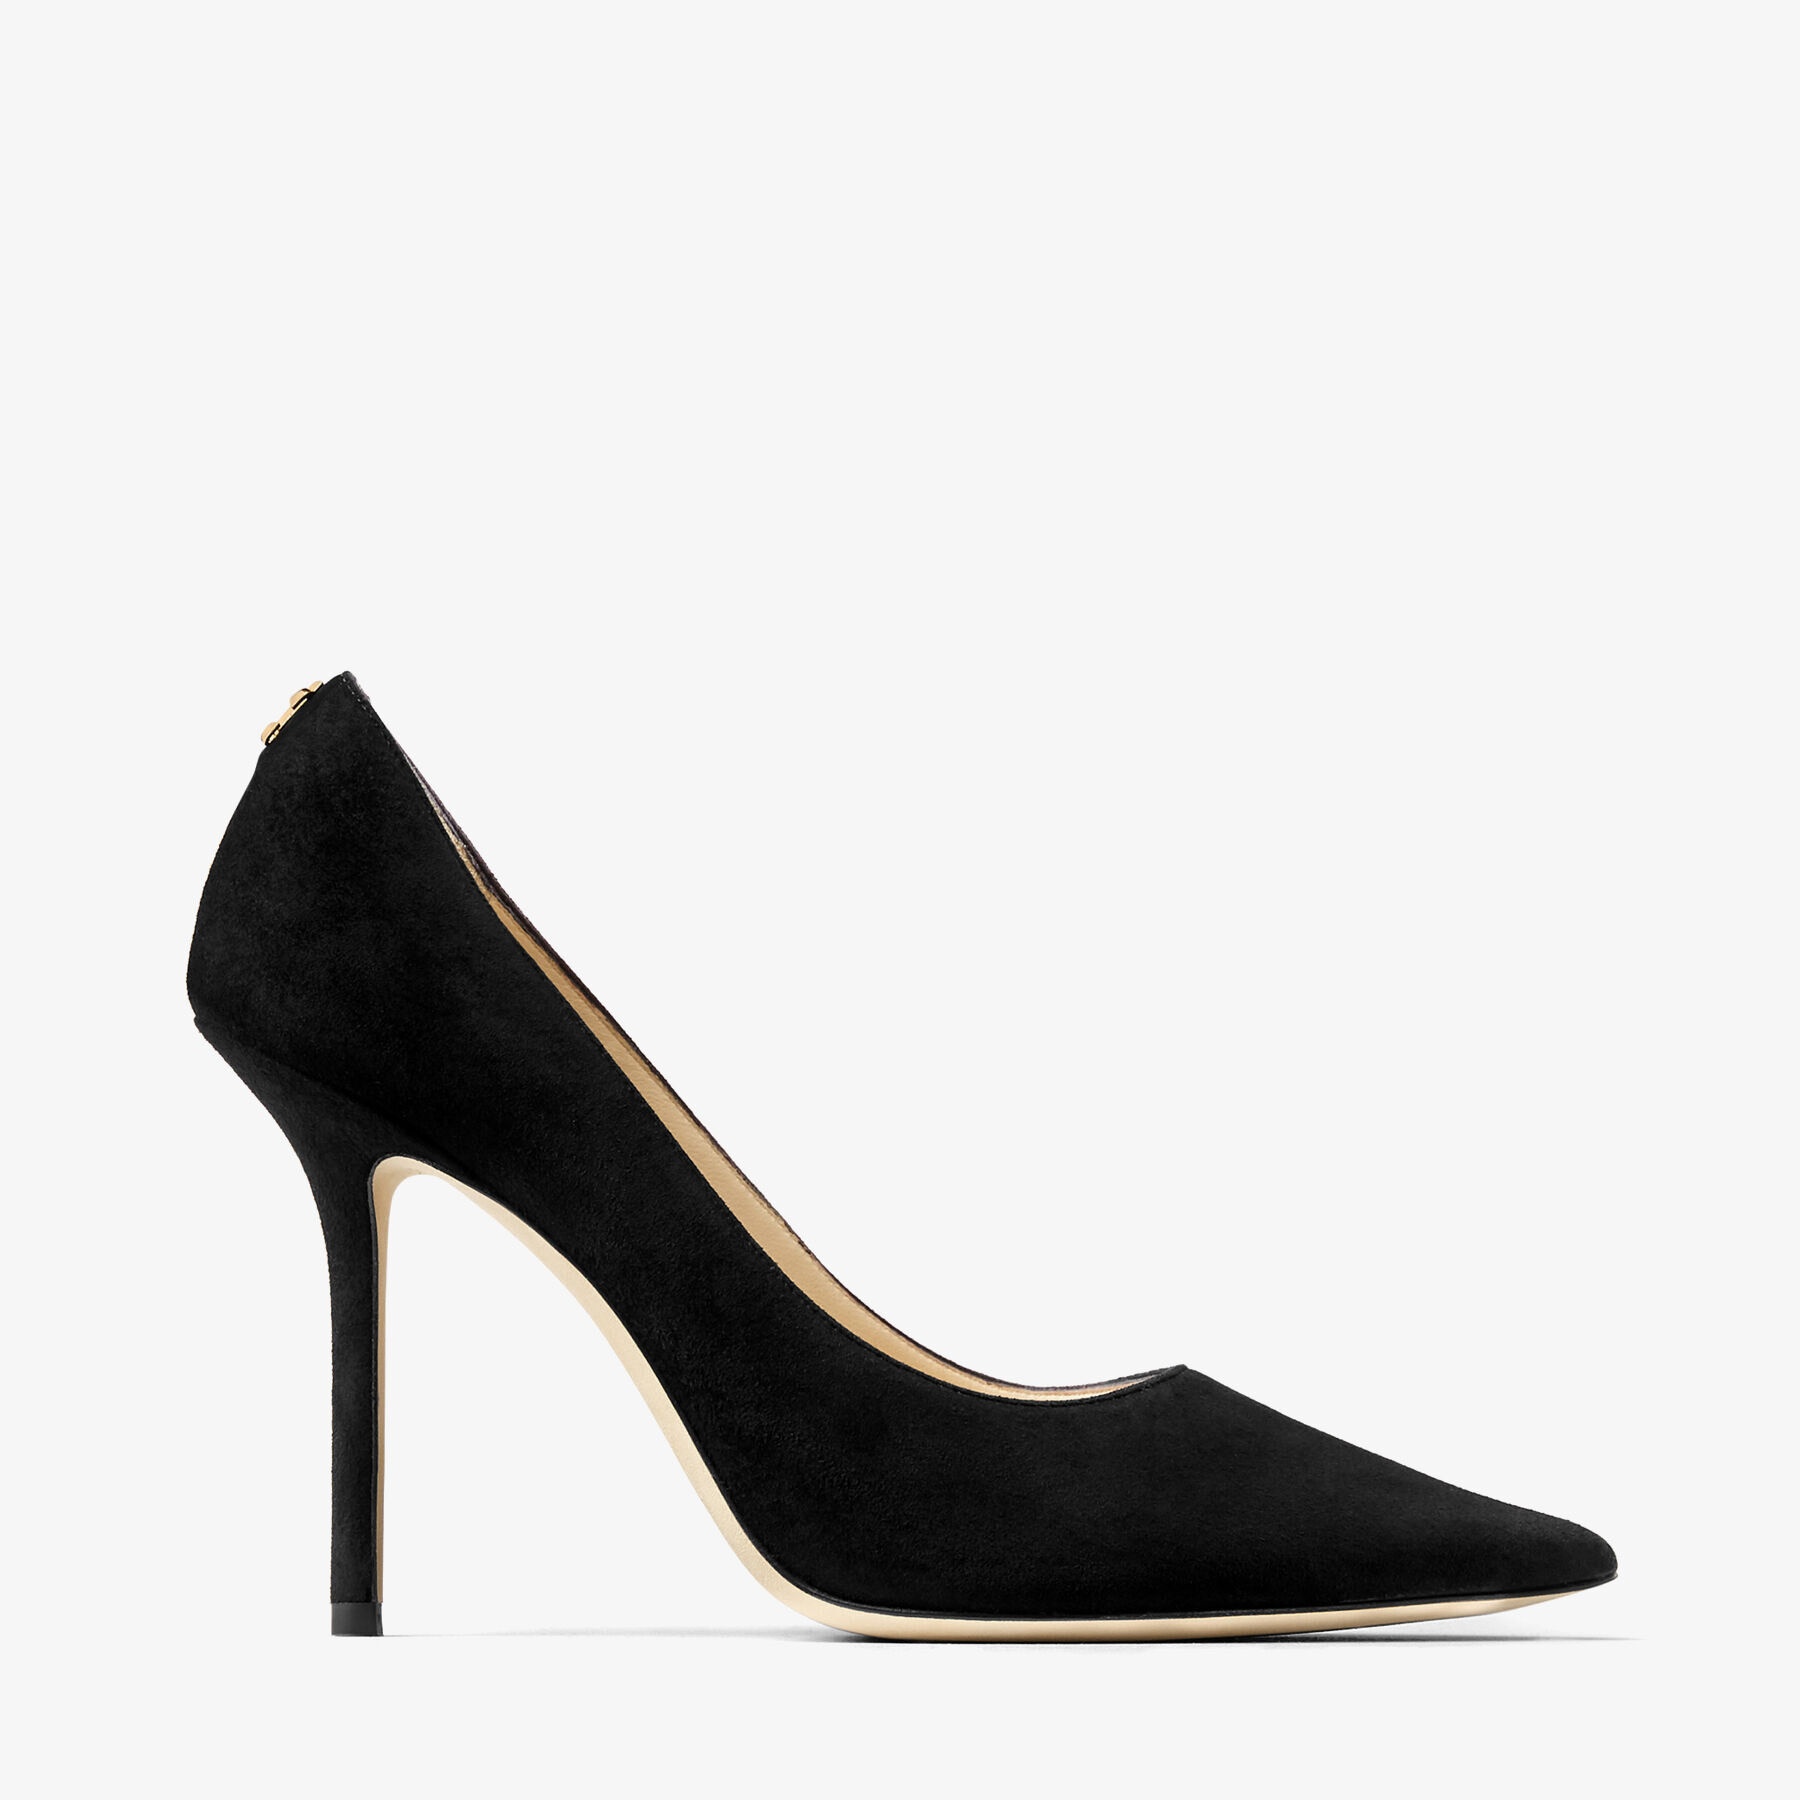 Love 100
Black Suede Pointy Toe Pumps with Jimmy Choo Button - 1